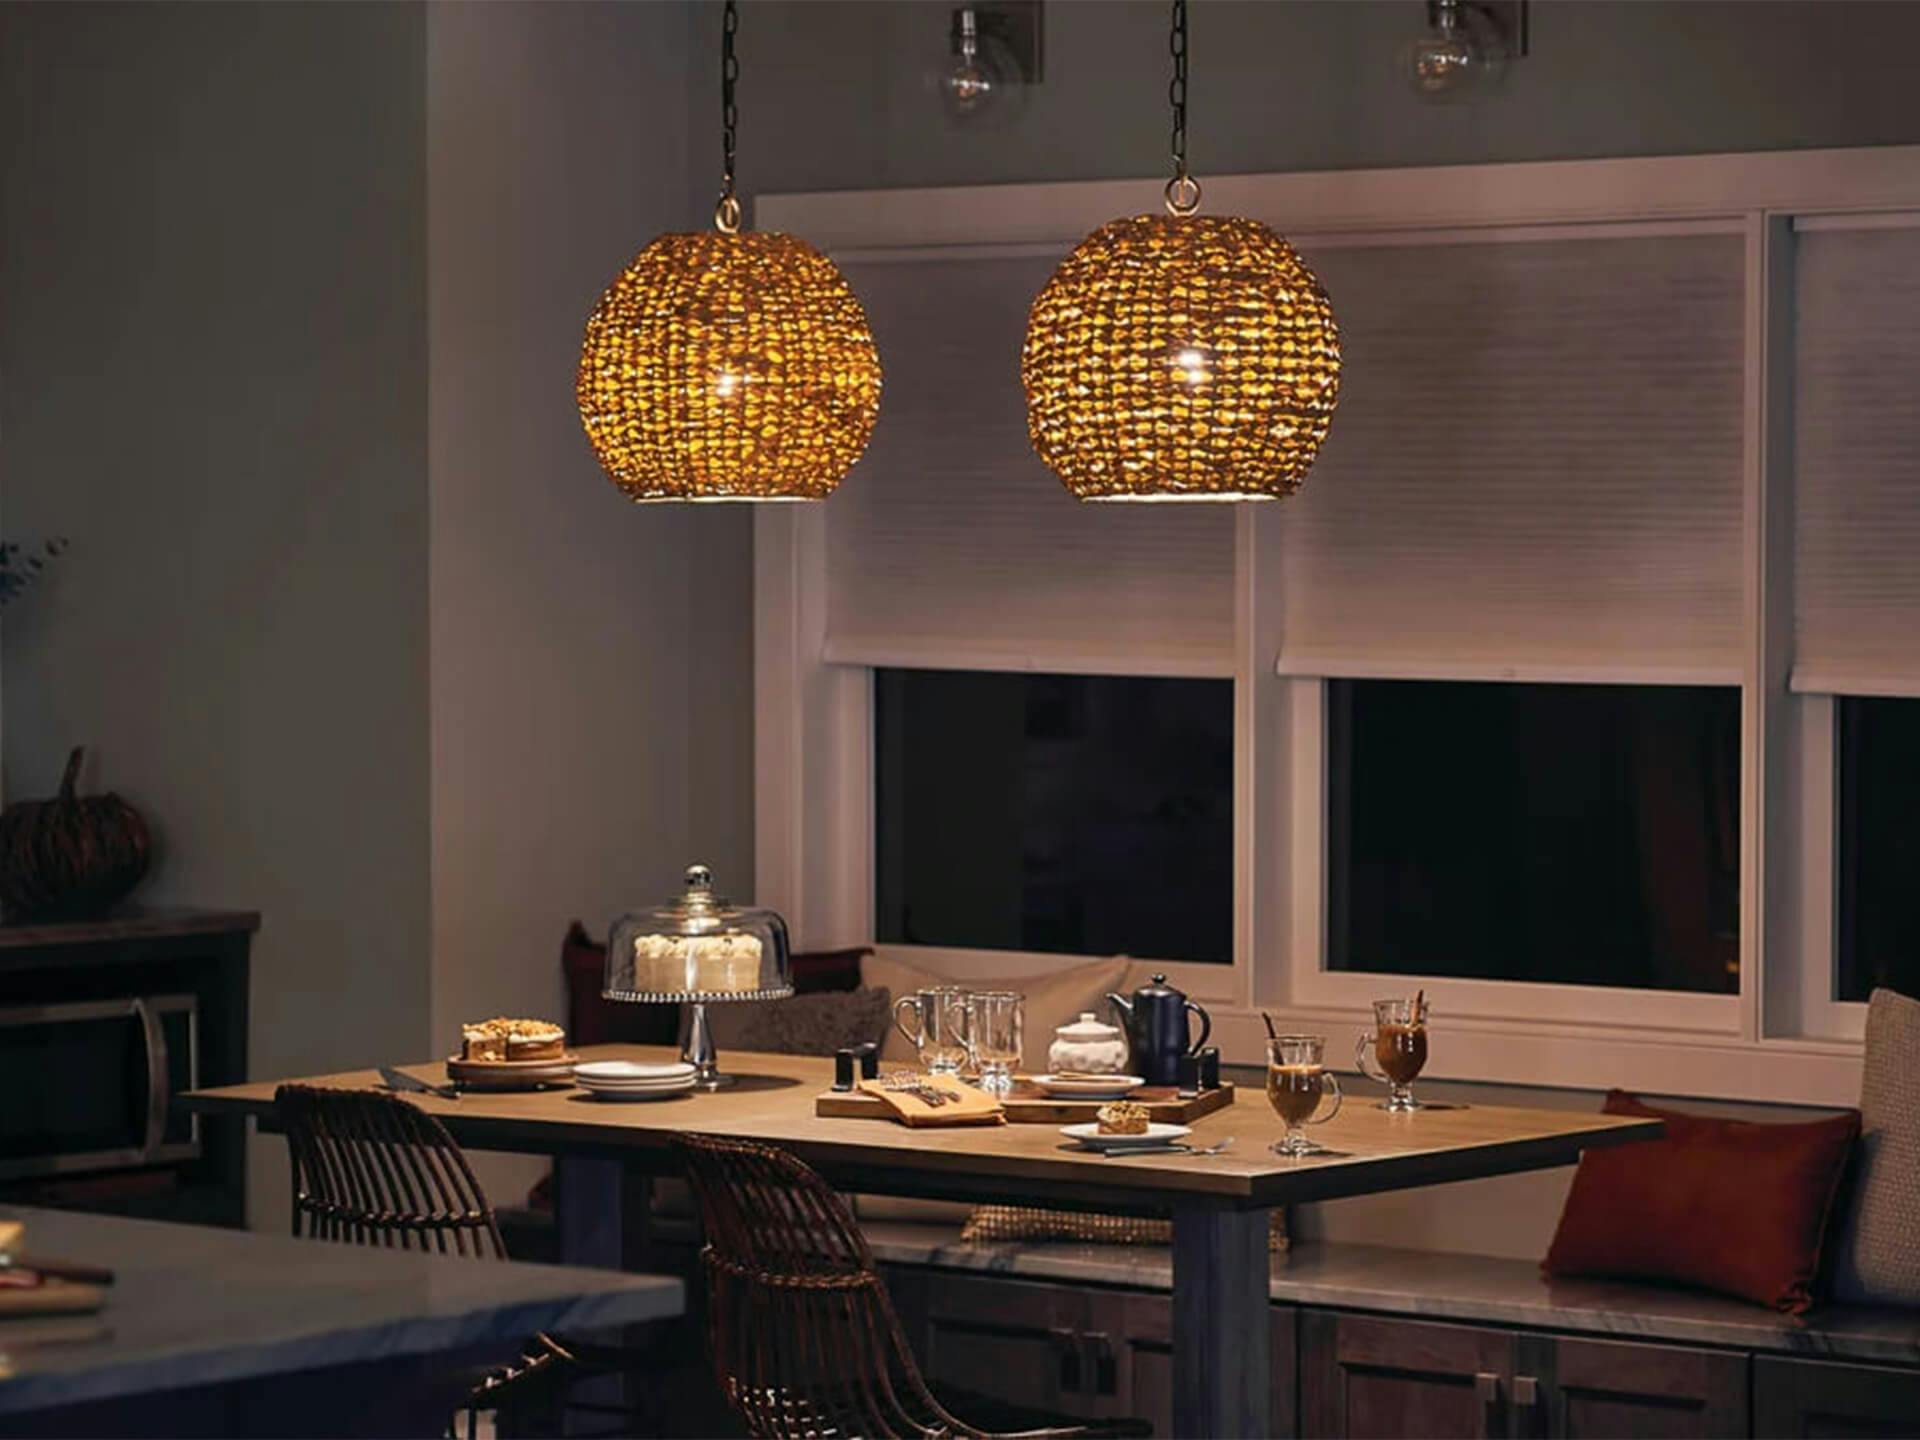 Two Palisades pendant lights hanging over a warmly lit dining room table